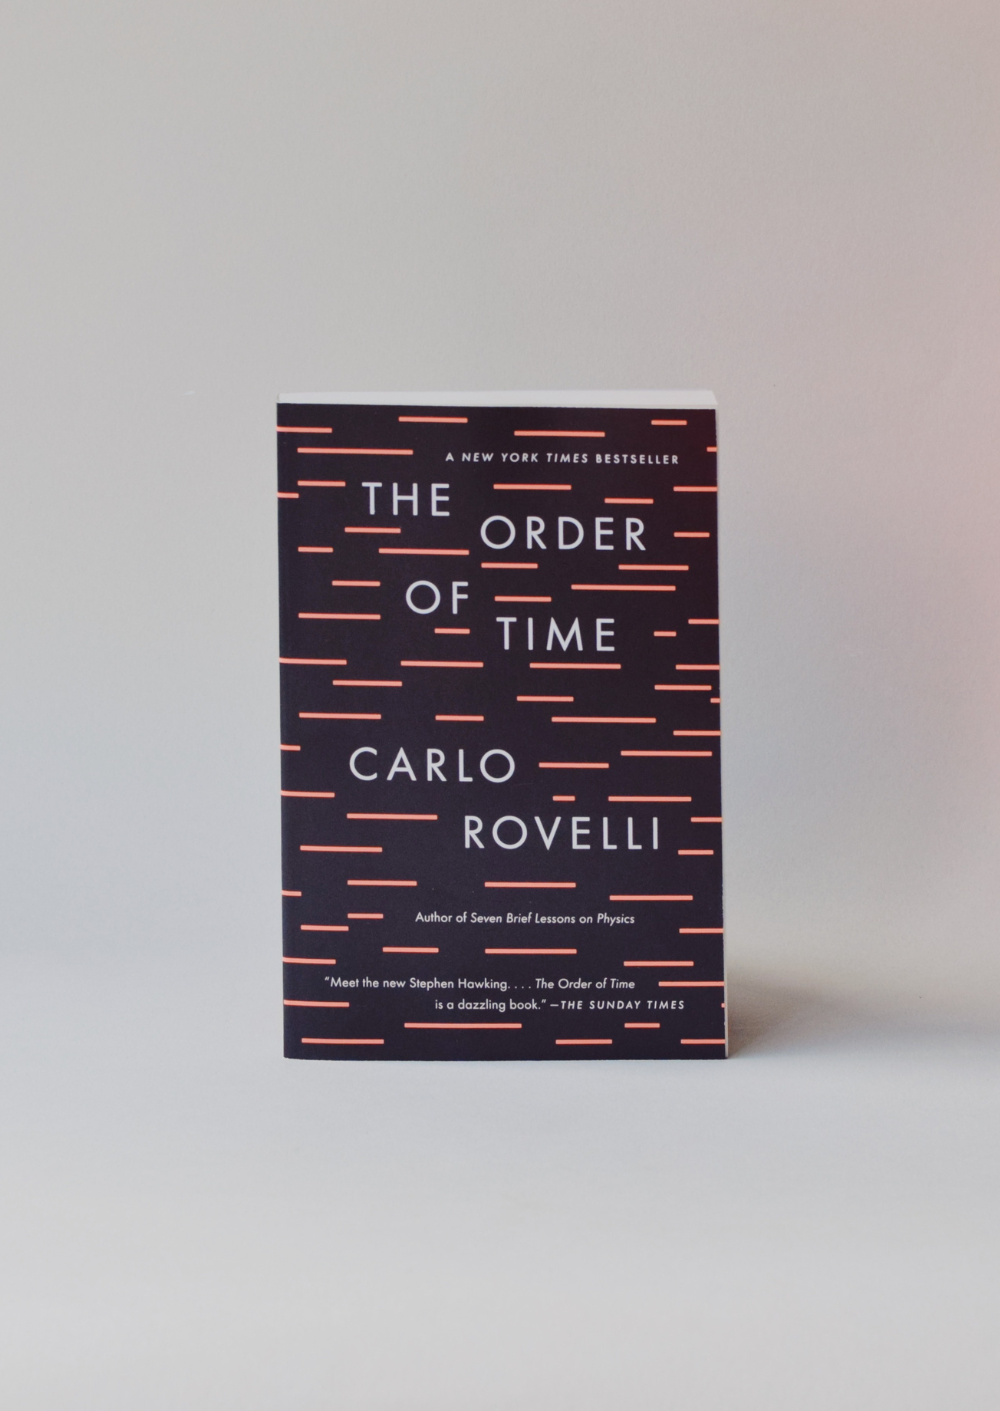 Carlo Rovelli - The Order of Time